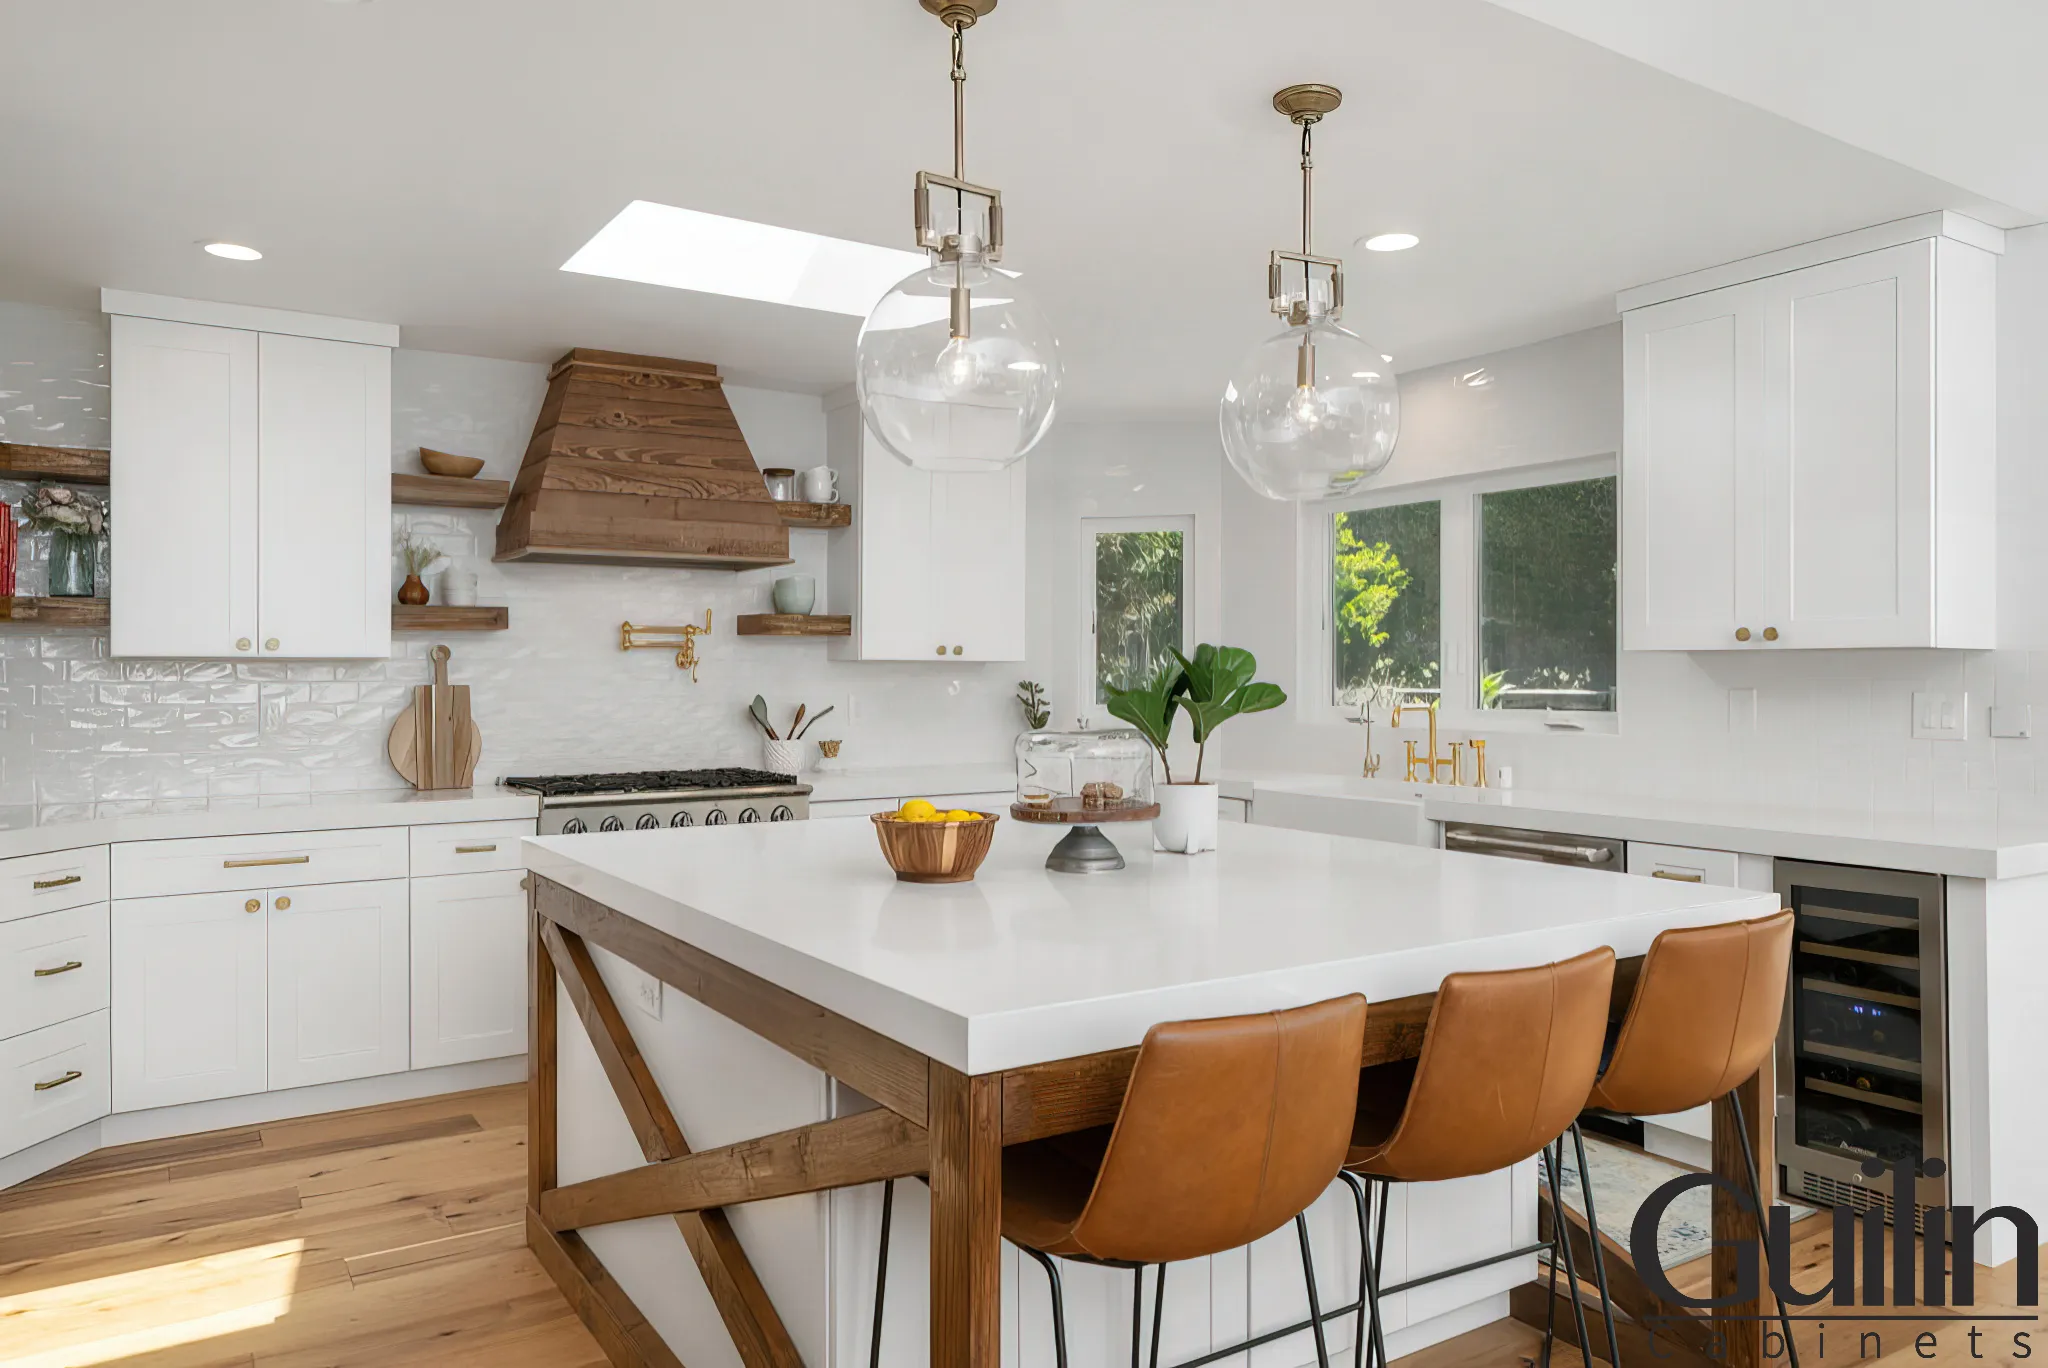 Investing in a kitchen remodel is a surefire way to increase the value of your home.